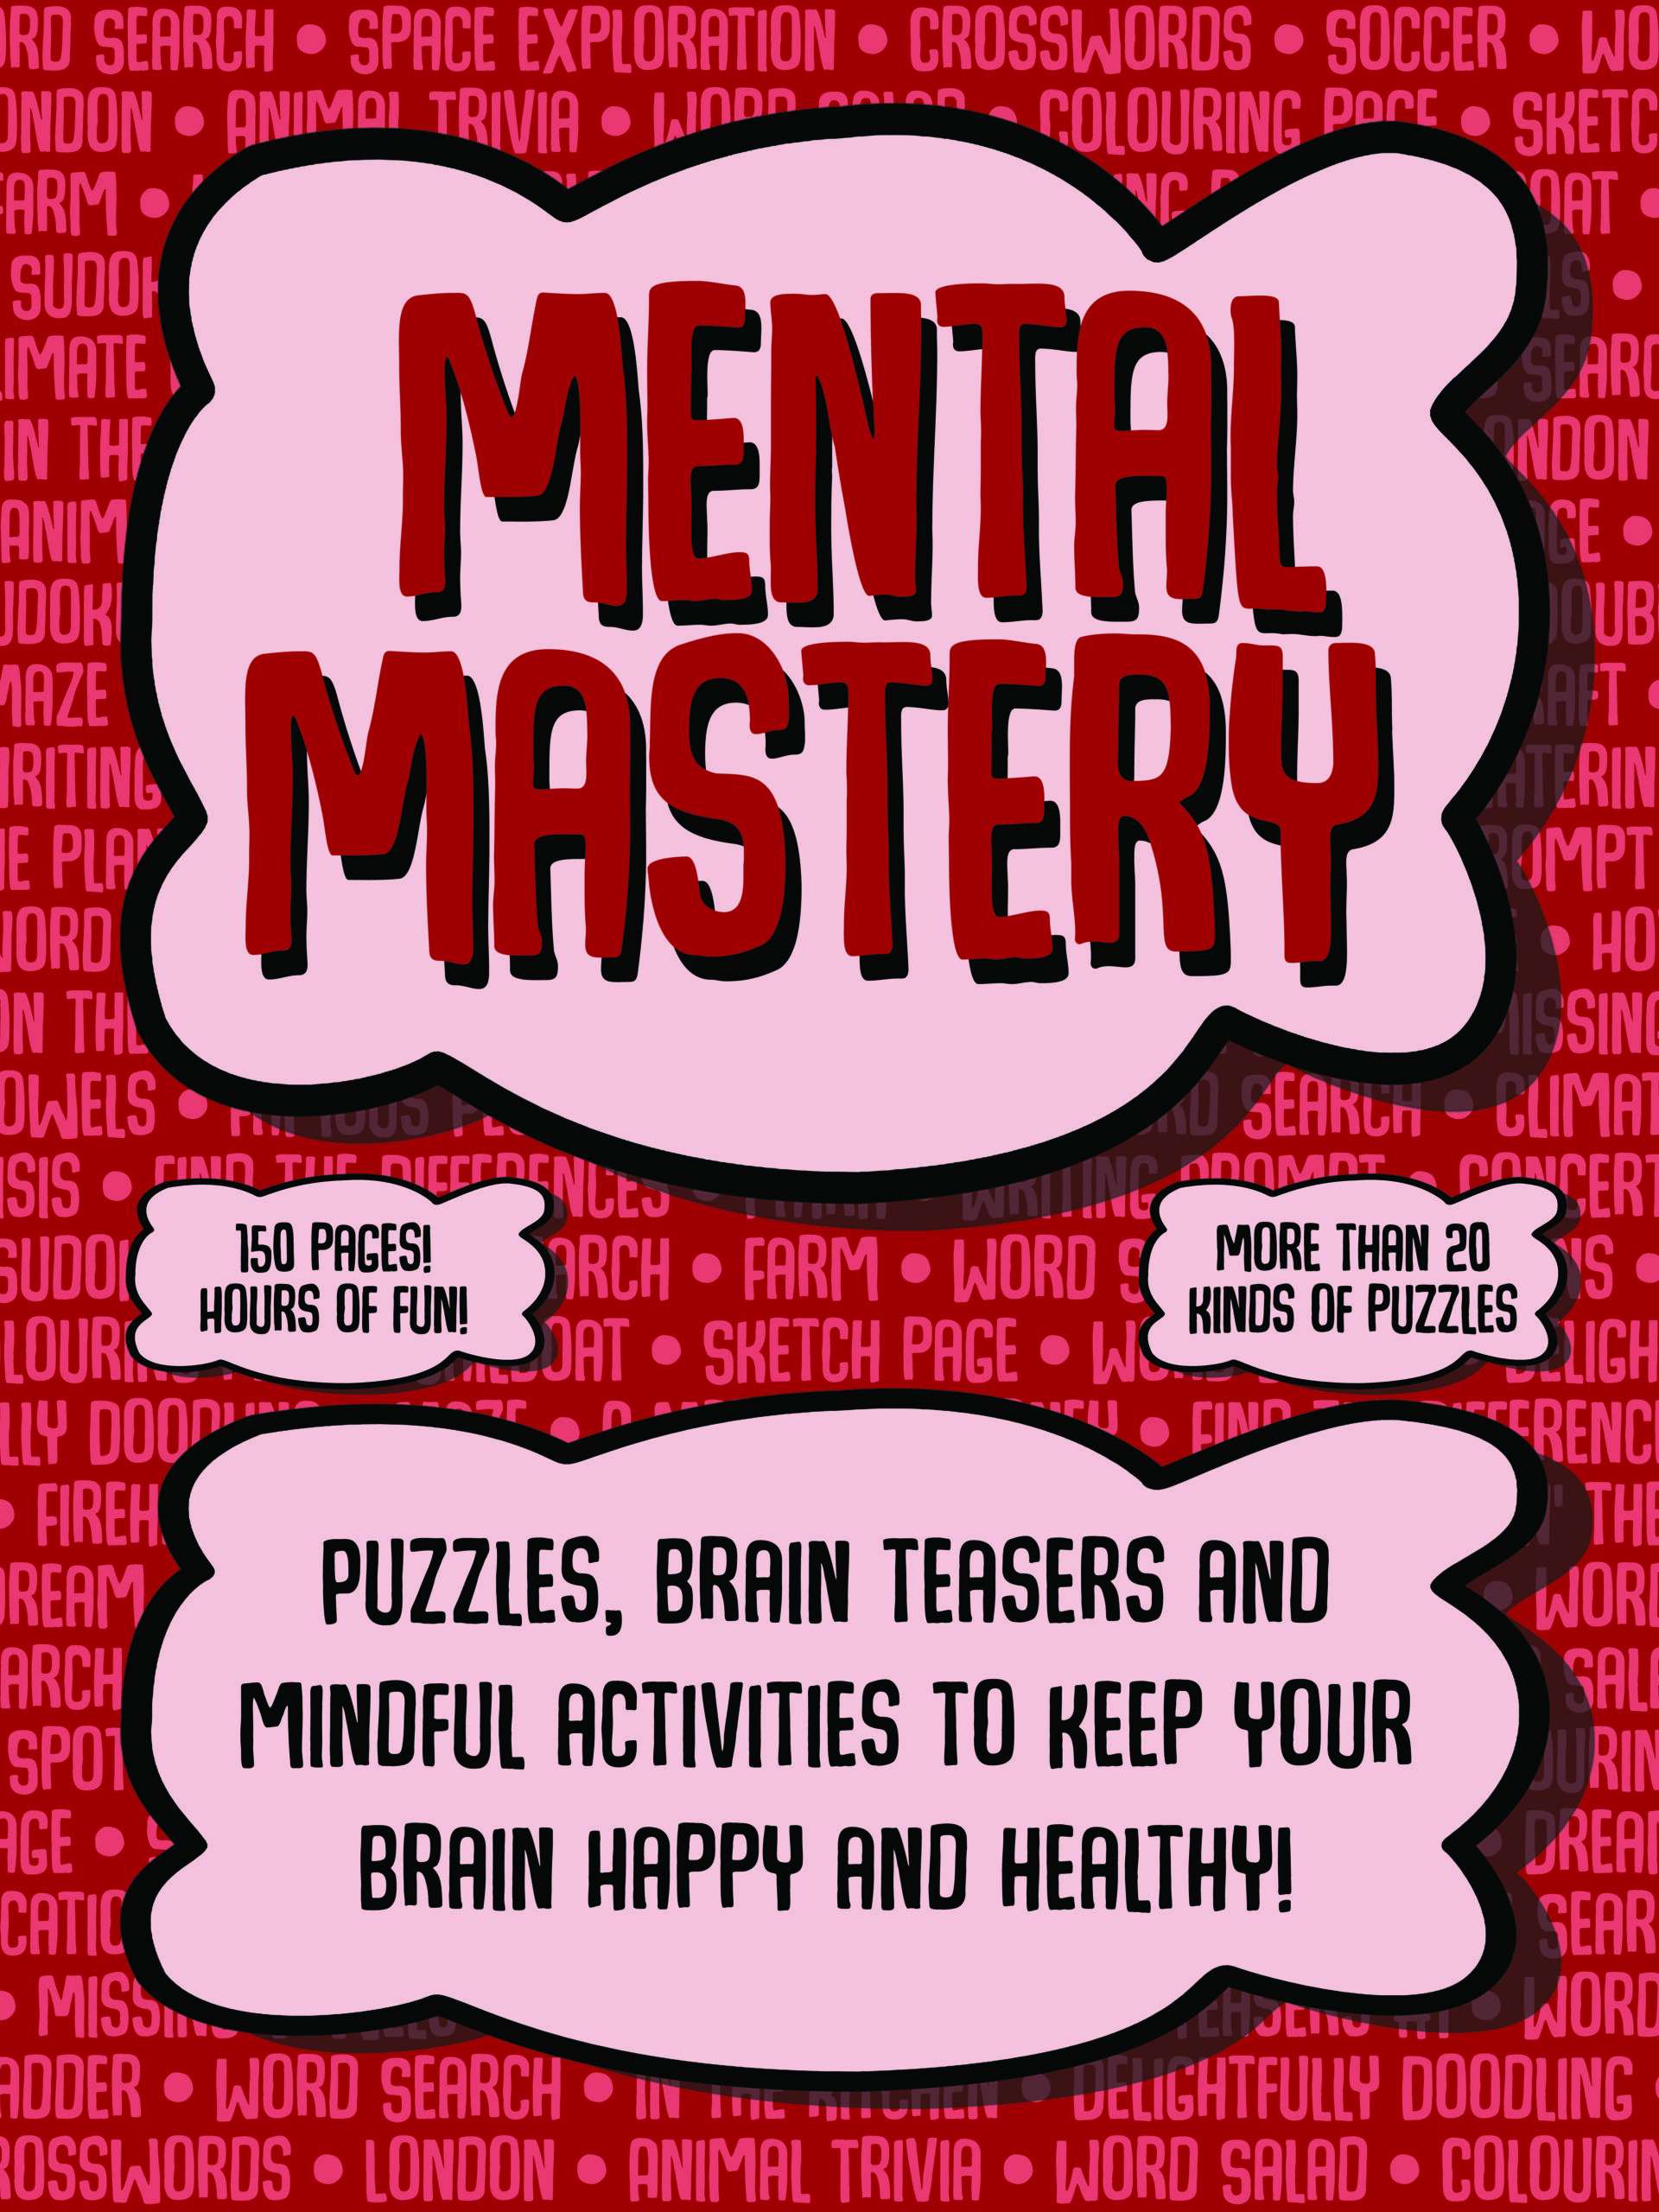 Mental Mastery book cover for book of more that 20 types of puzzles